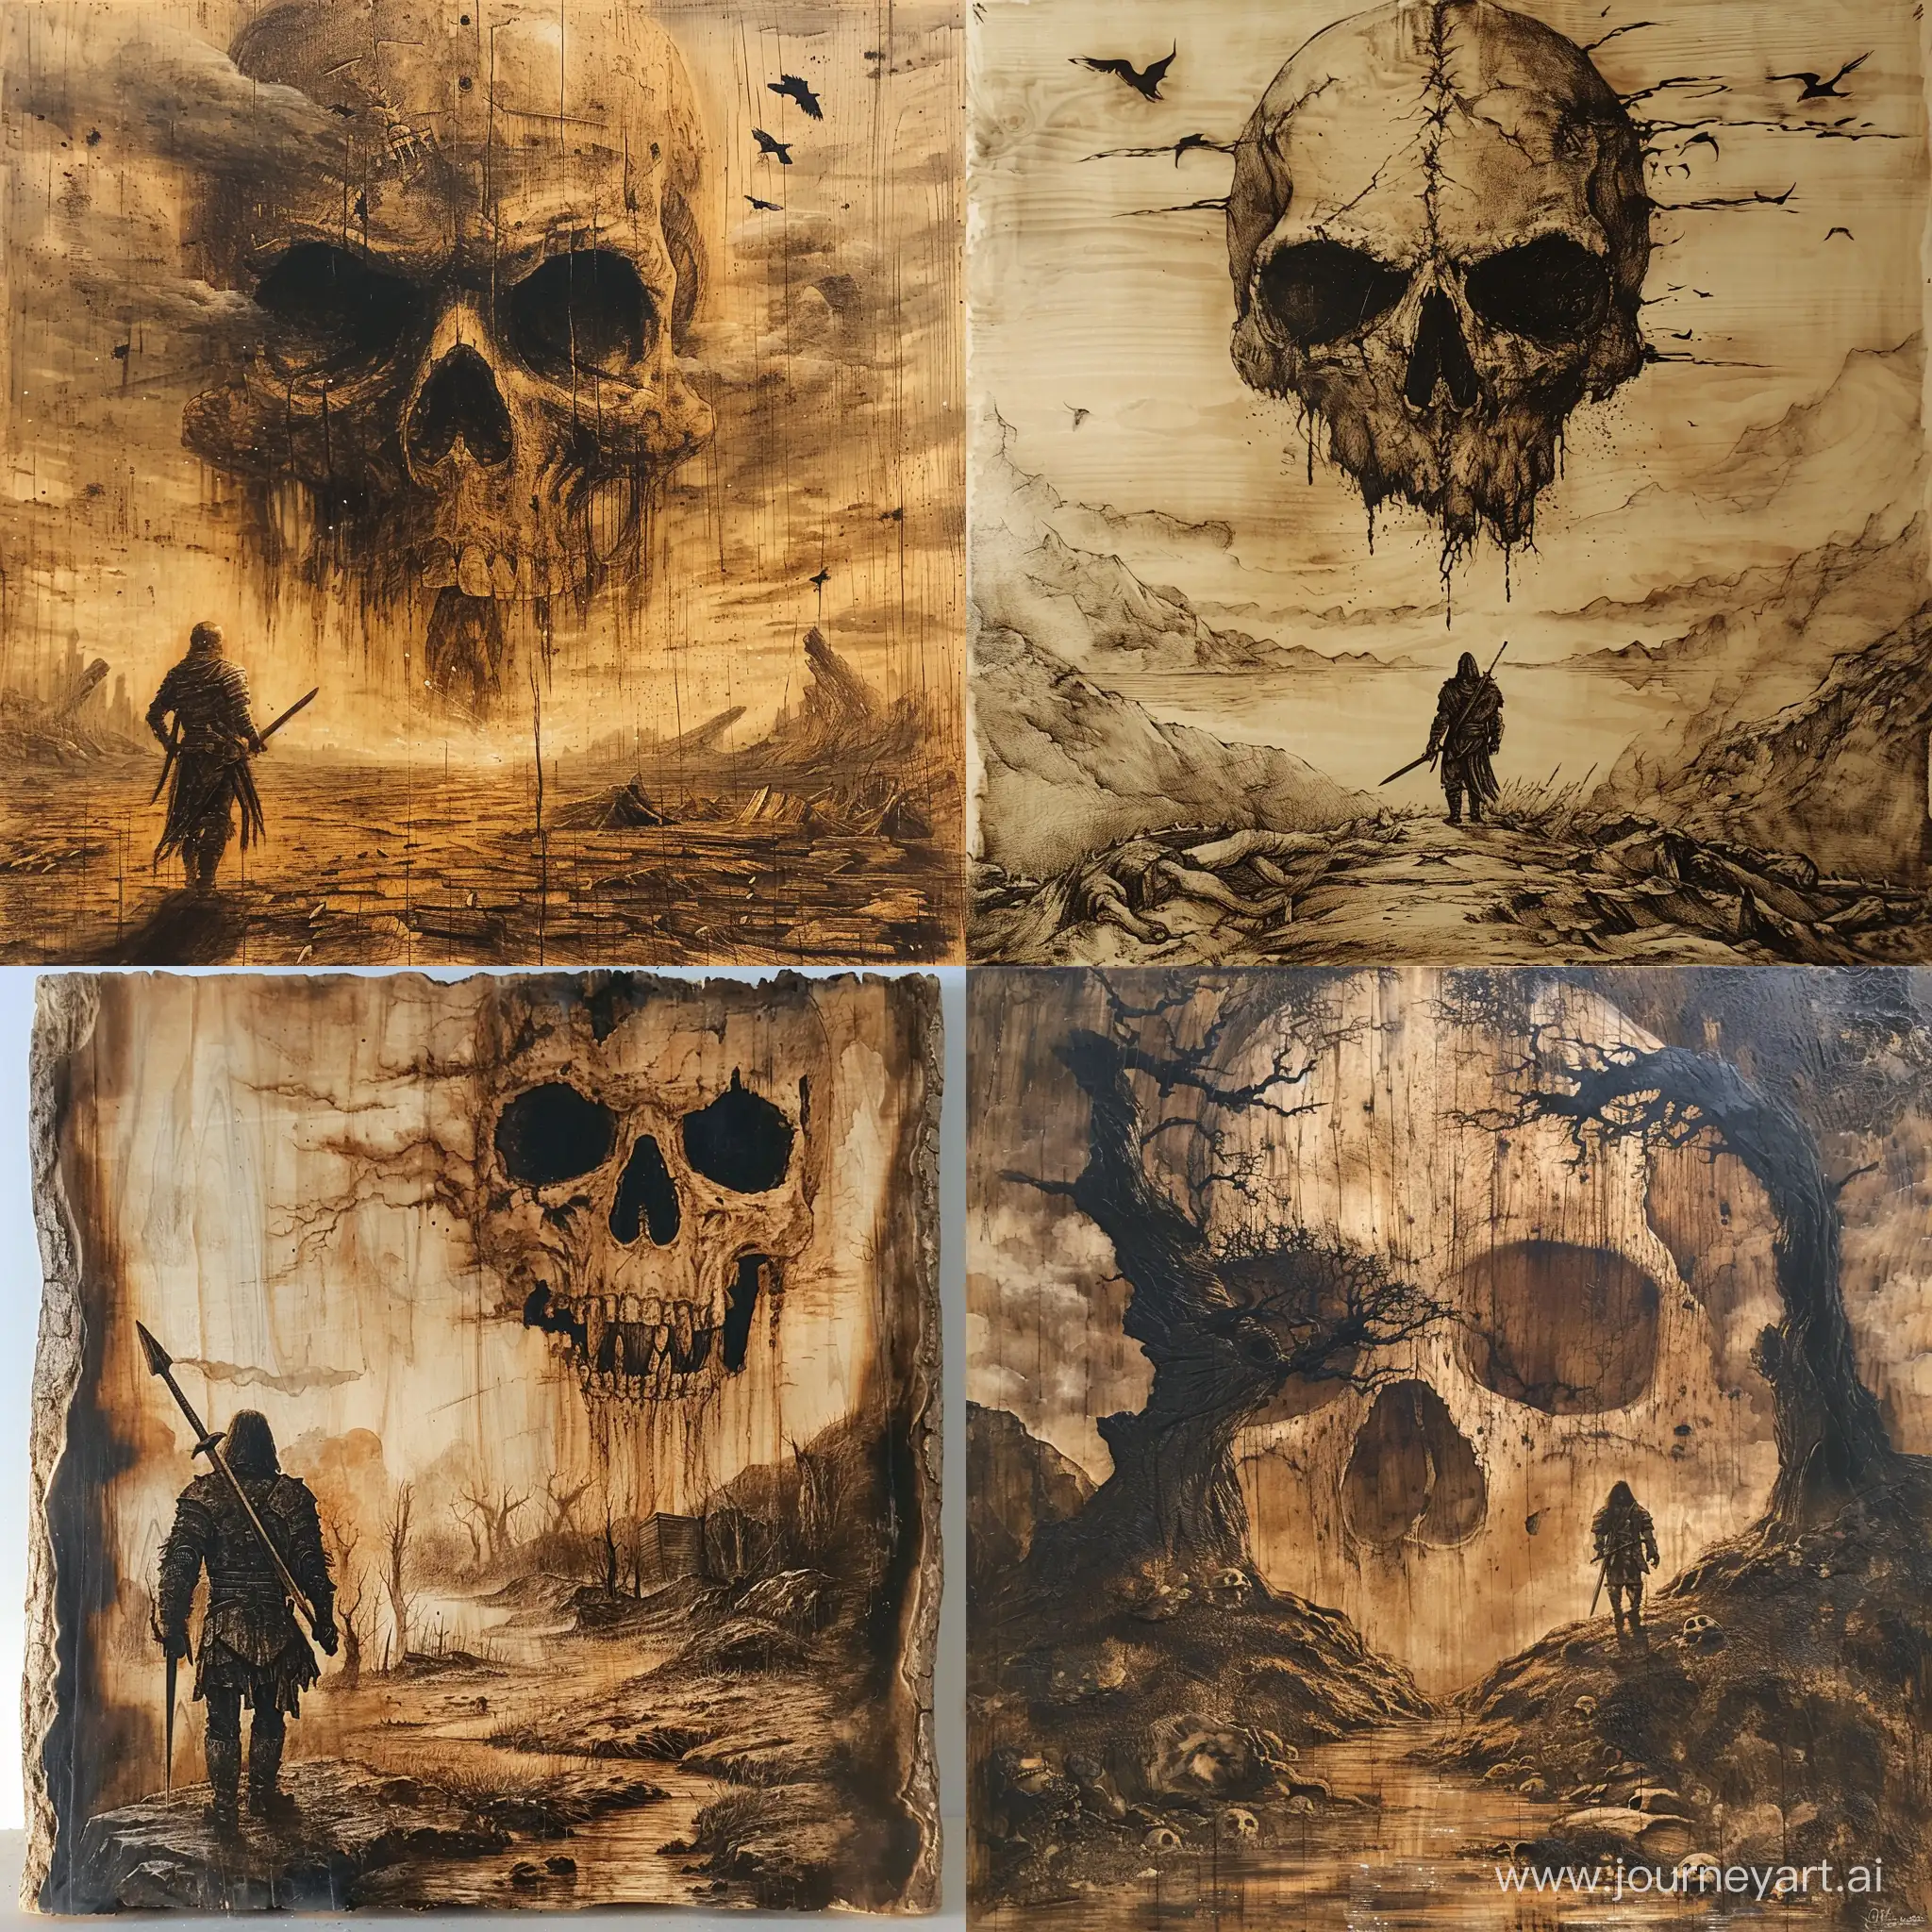 Pyrography, ::1.5. a warrior stands in a desolate land with a giant skull looming above them. The warrior is equipped with a sword and shield, there is a skull with glowing eyes in the background. The scene is set at dusk, there are crows flying around. --v 6